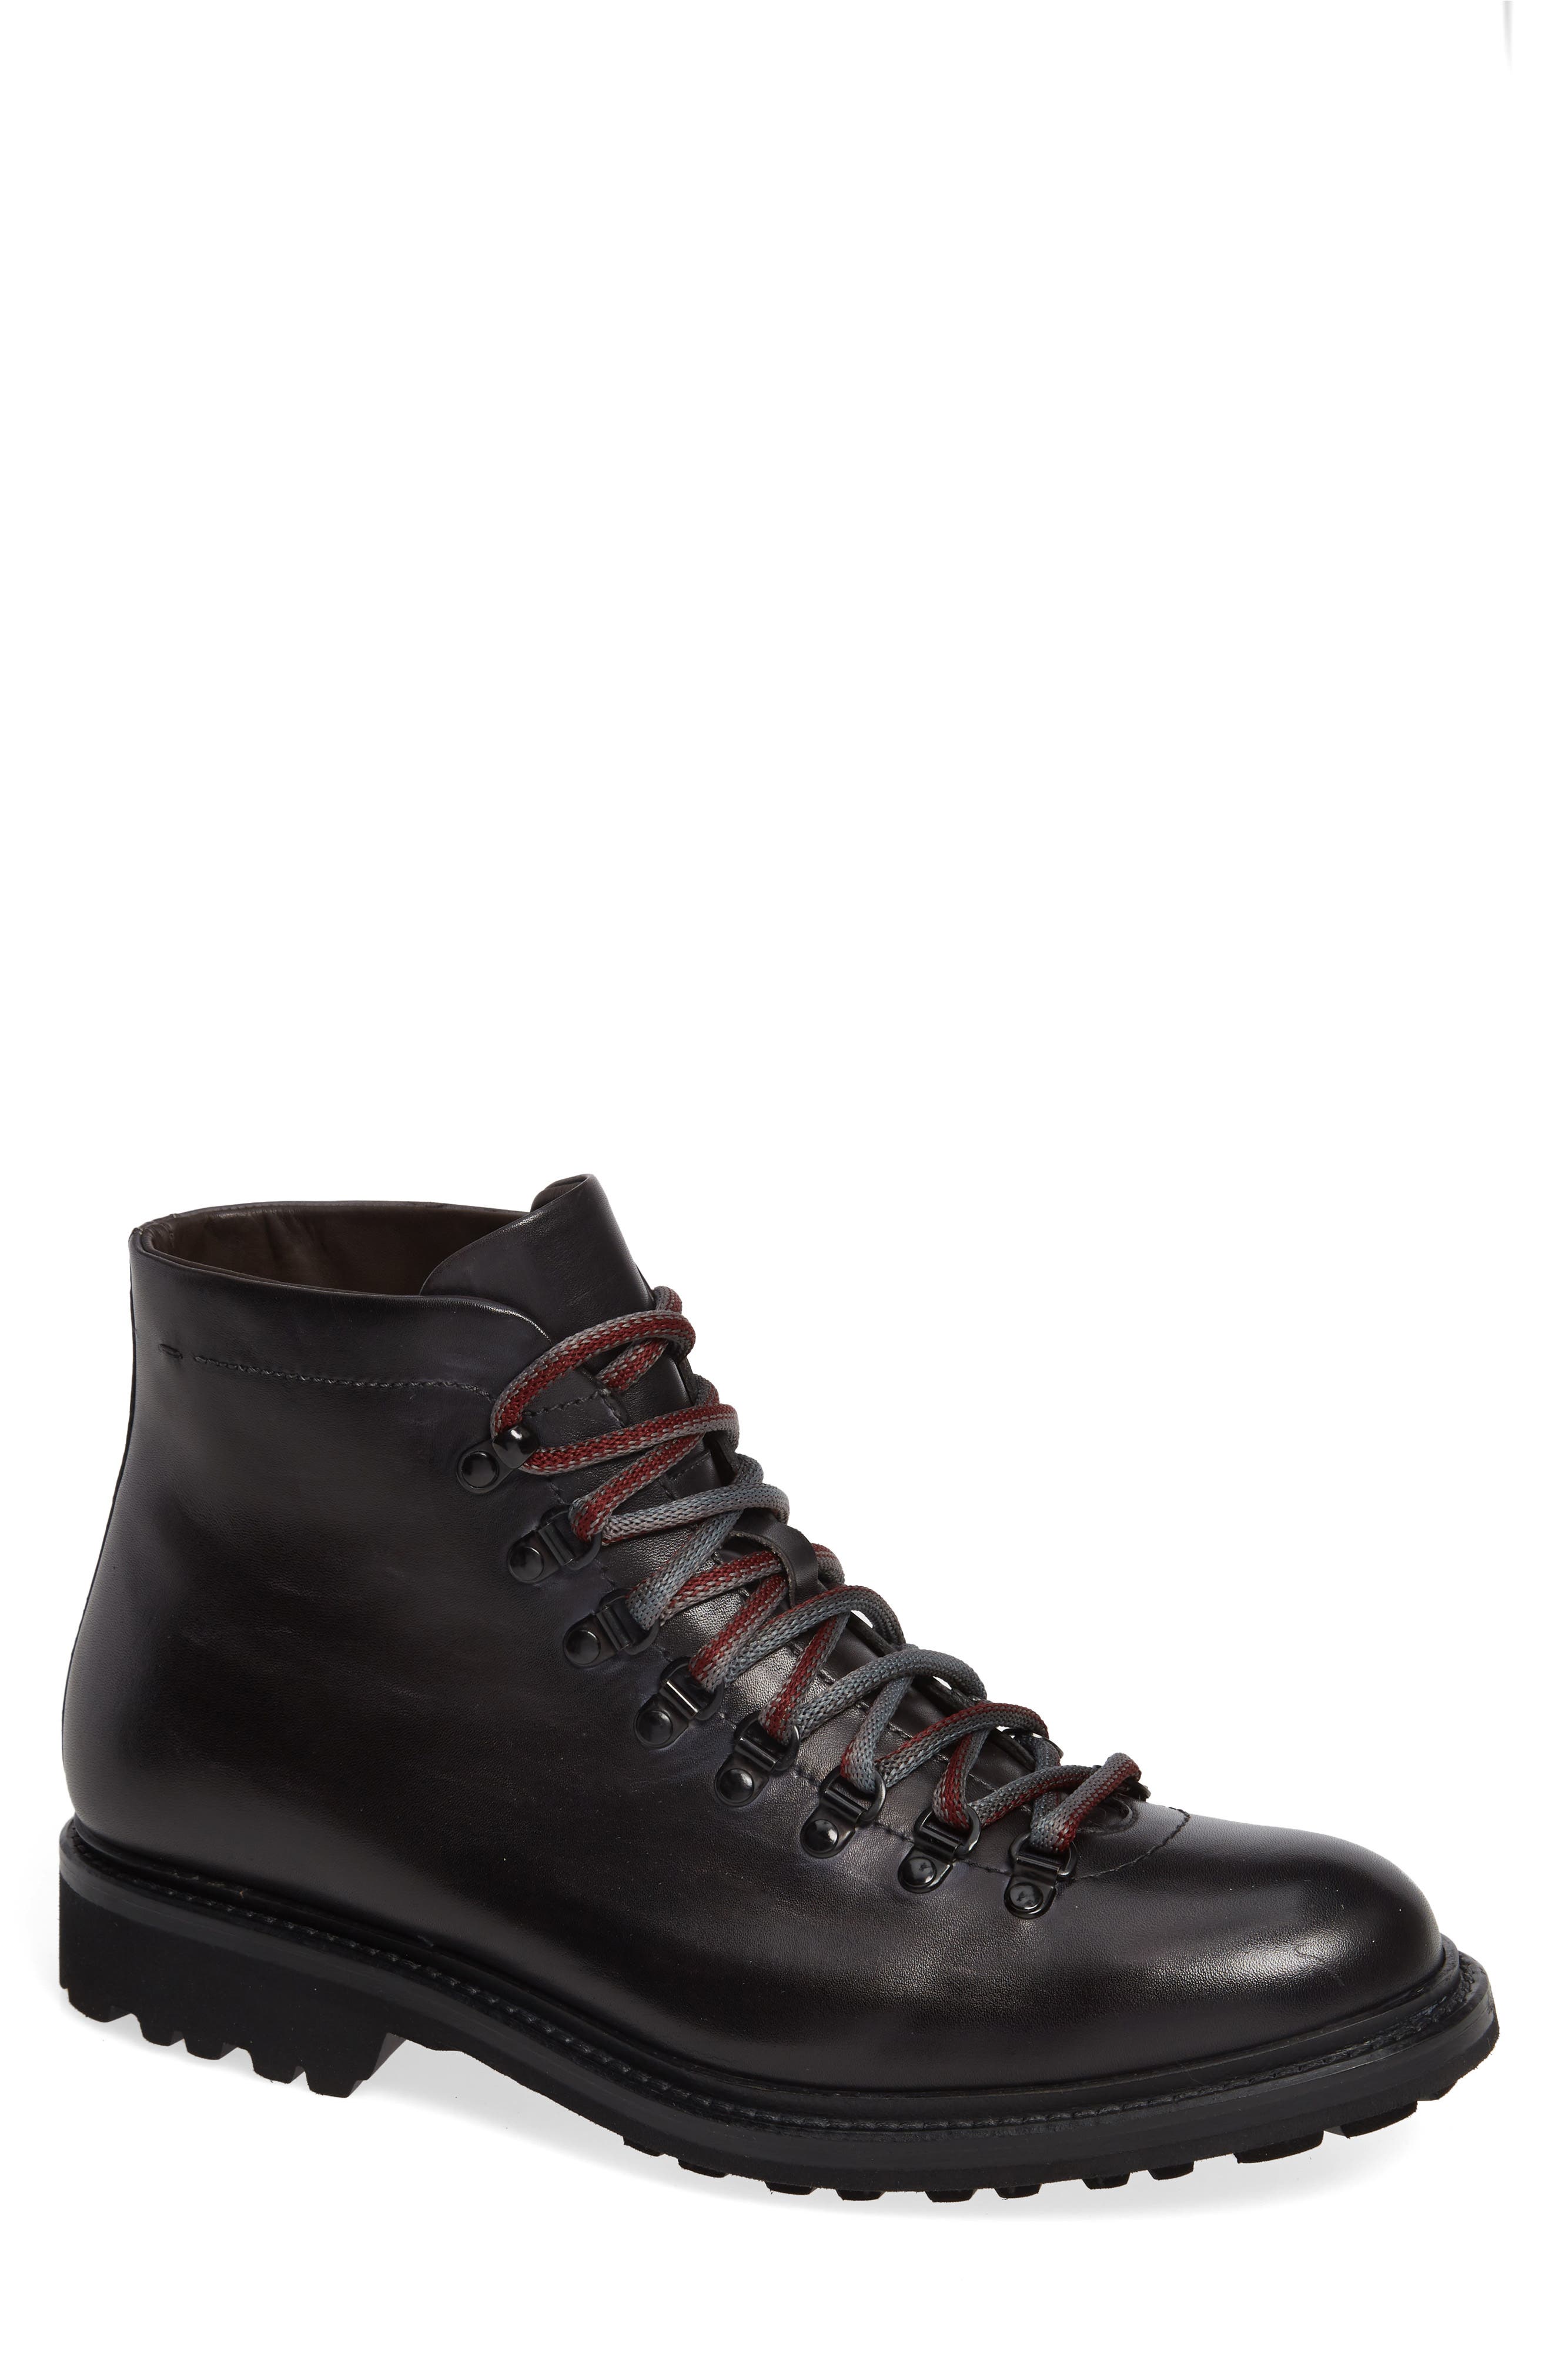 Magnanni Montana Water Resistant Hiking 